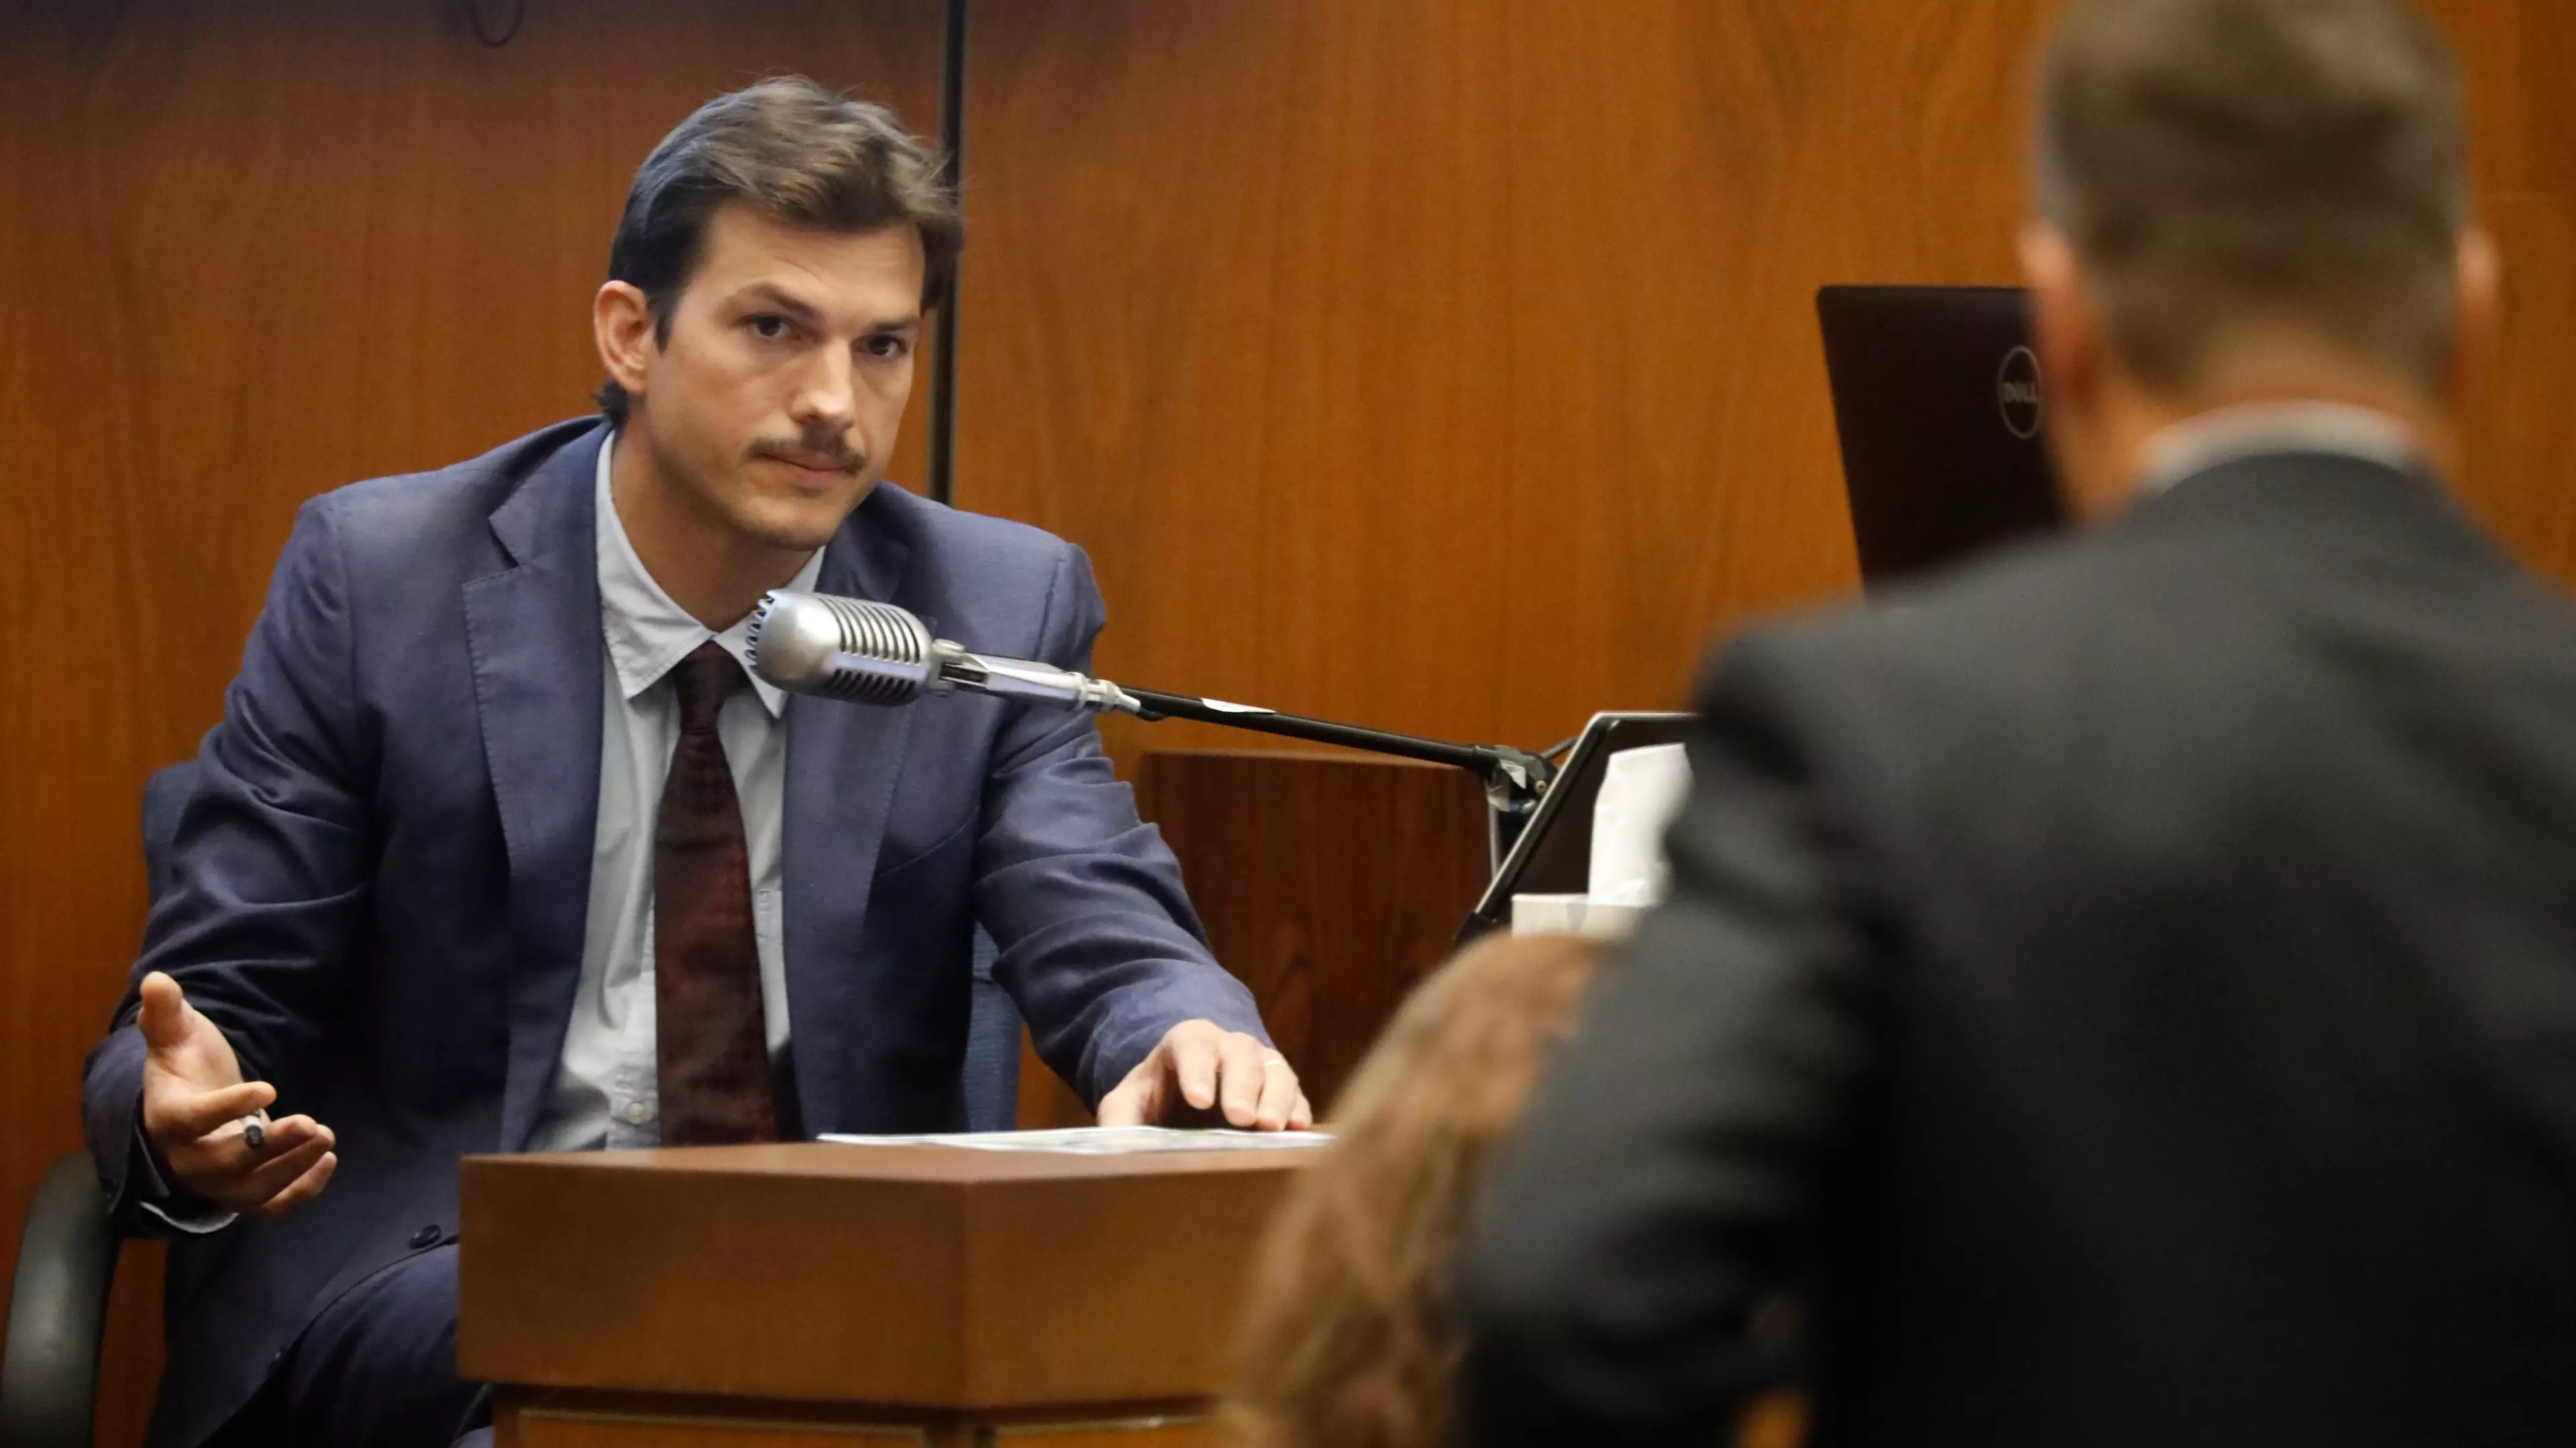 Ashton Kutcher Tells Court He 'Freaked Out' After Discovering Date Had Died